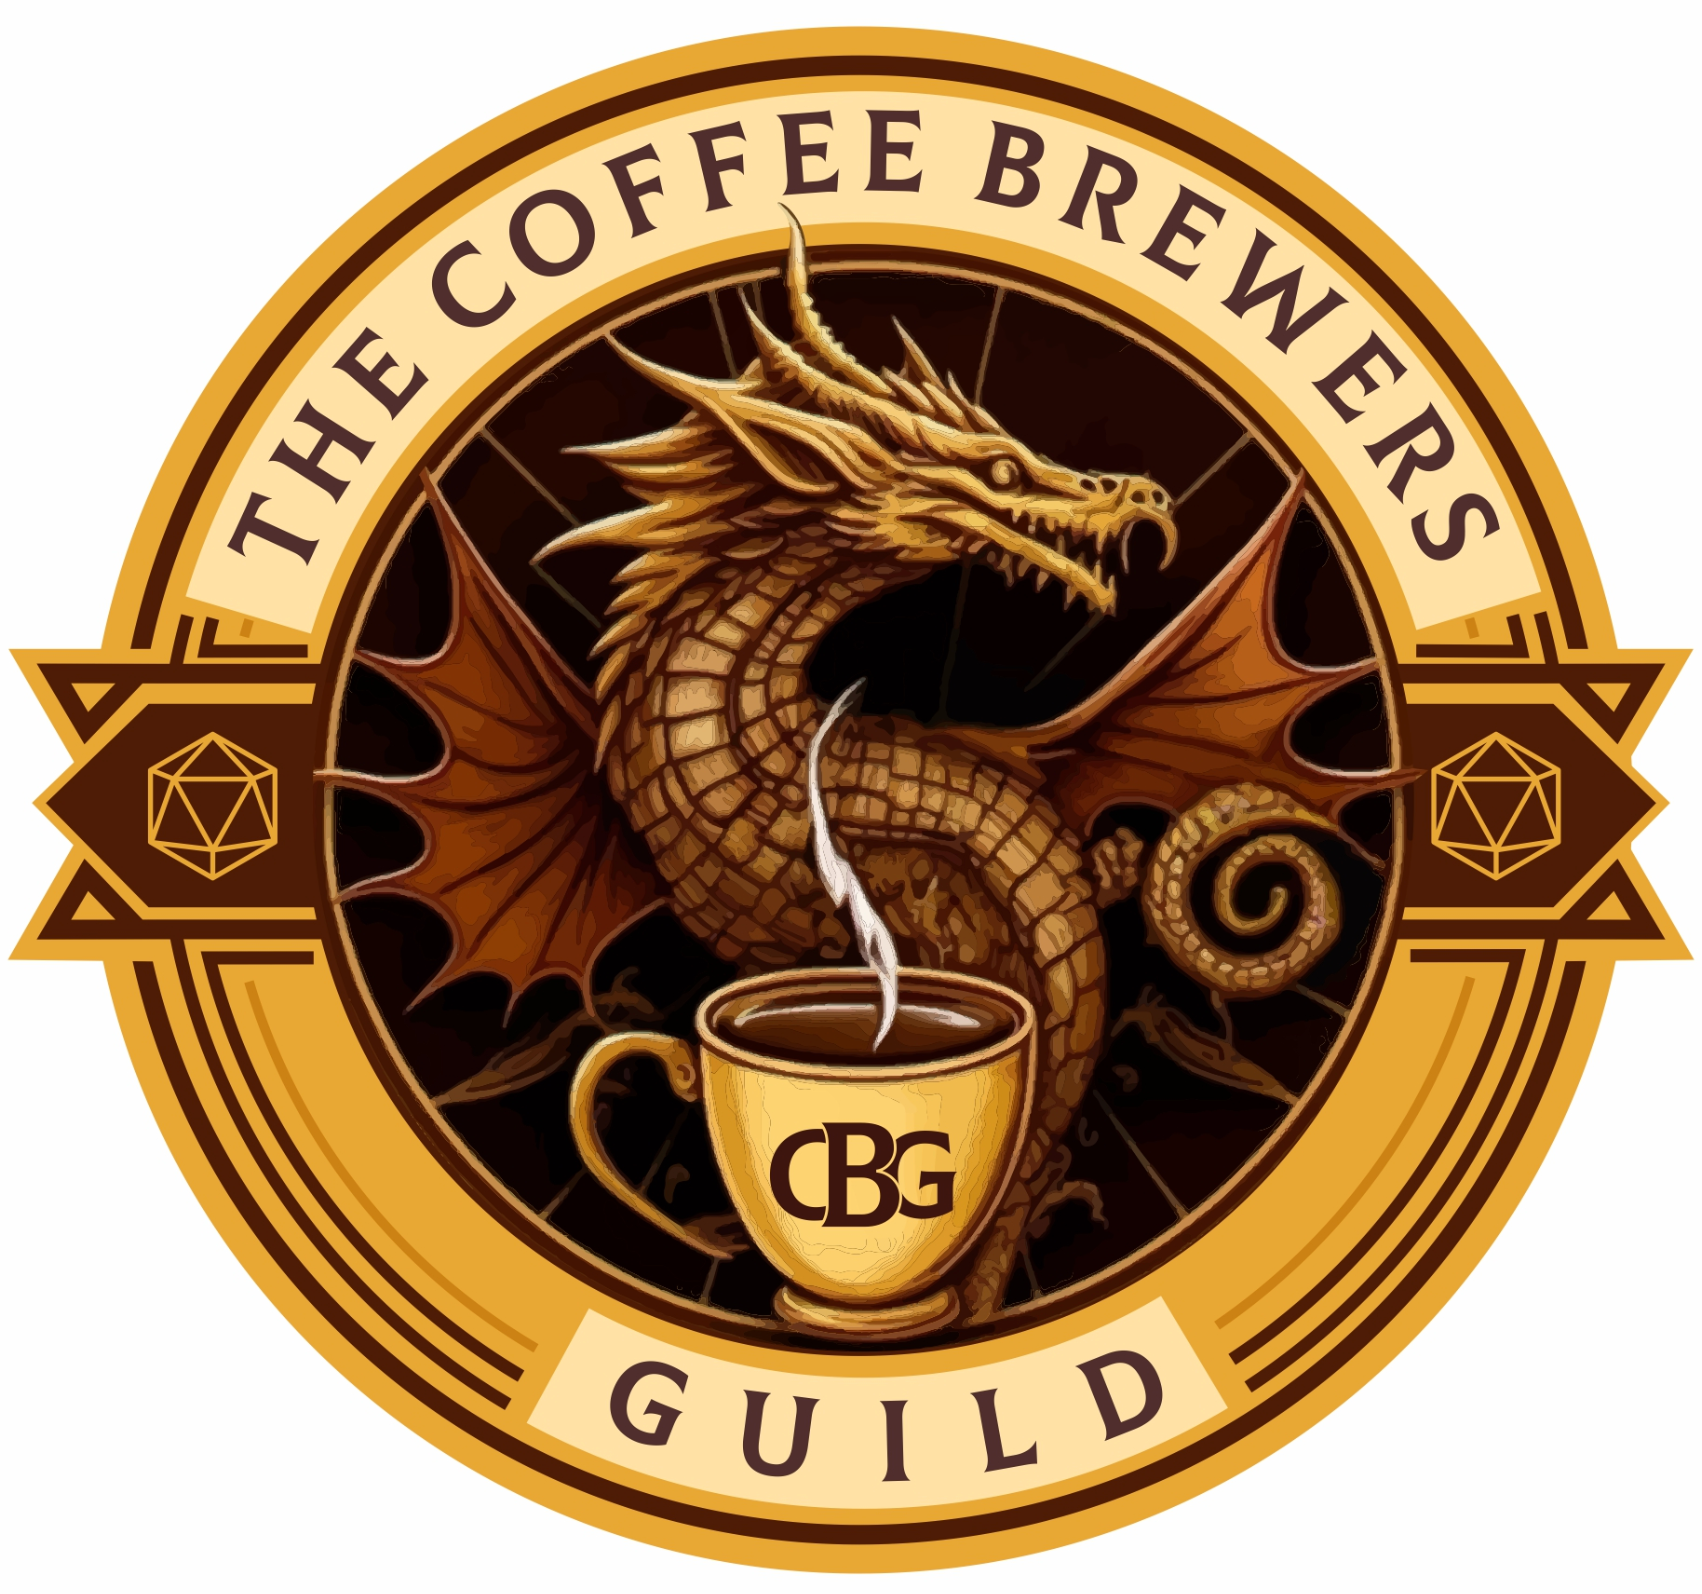 The Coffee Brewers Guild